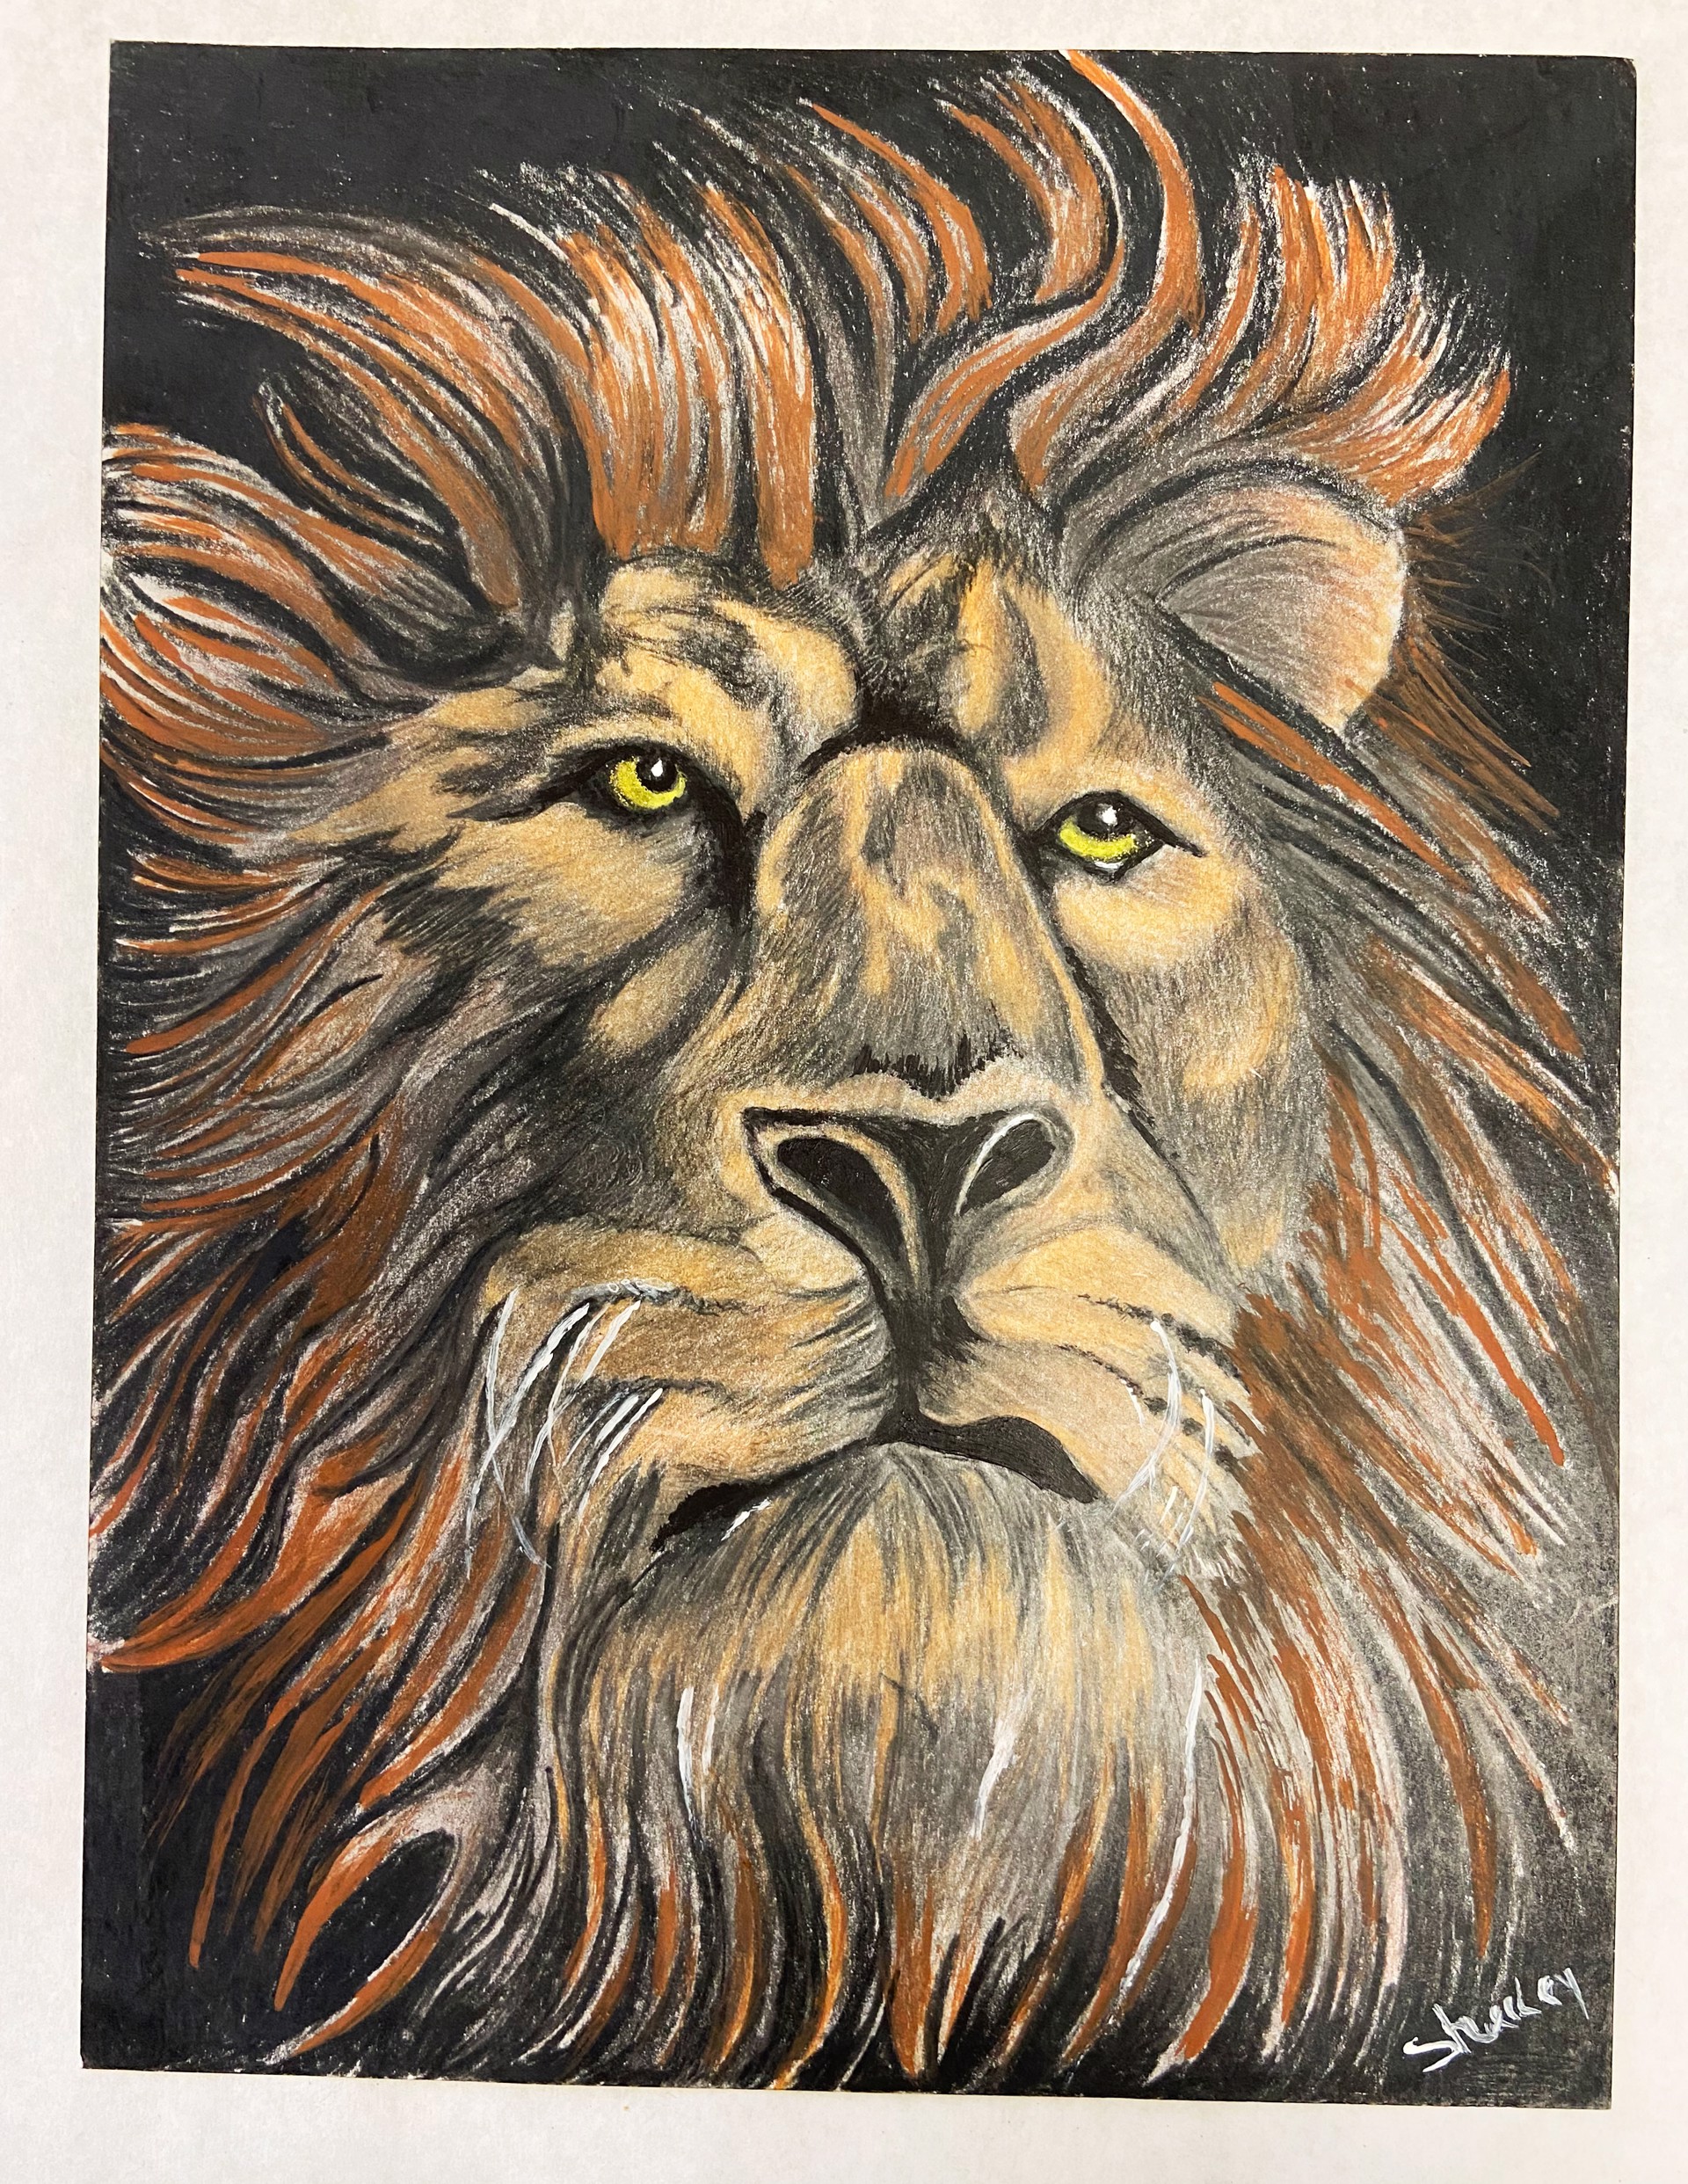 Heart of a Lion by Sheeley